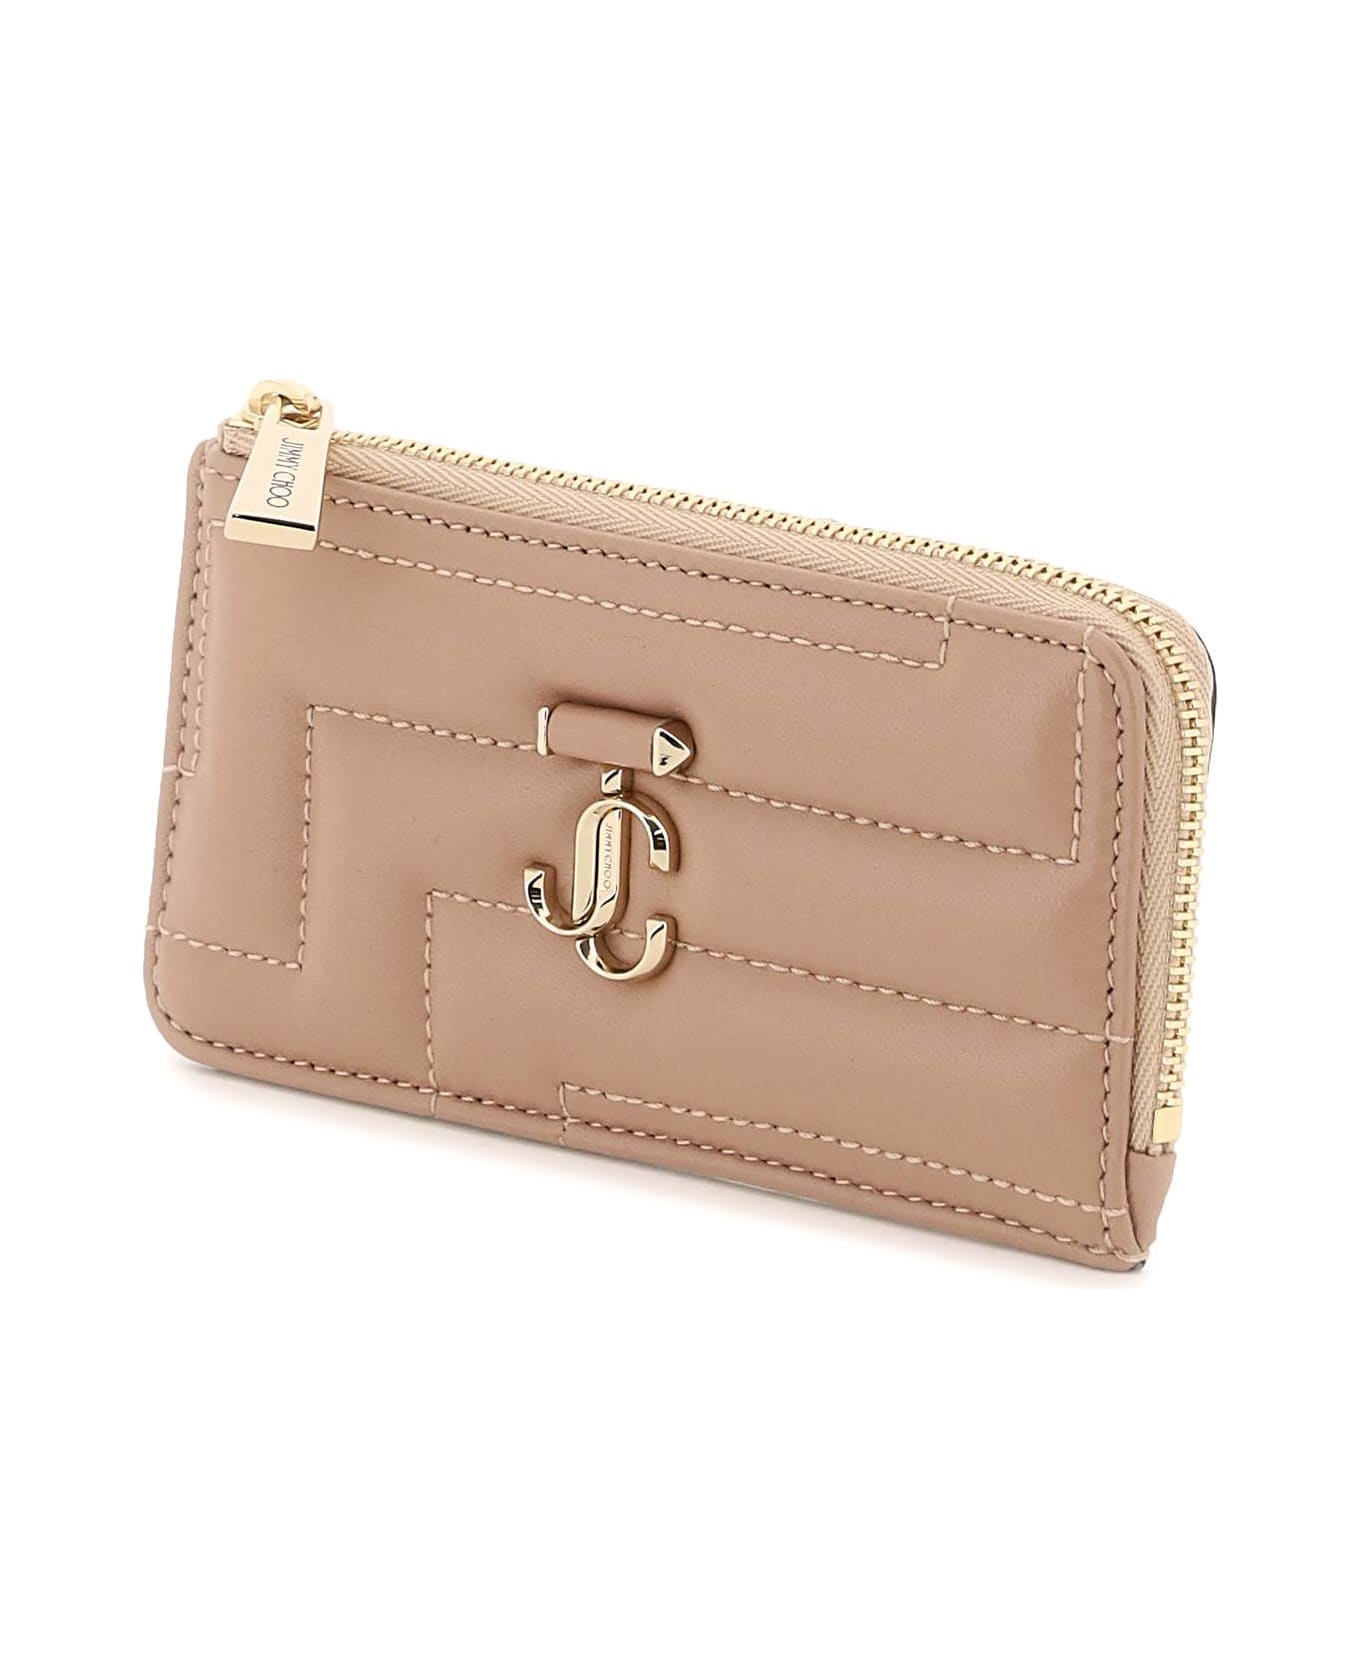 Jimmy Choo Quilted Nappa Leather Zipped Cardholder - BALLET PINK LIGHT GOLD (Pink)